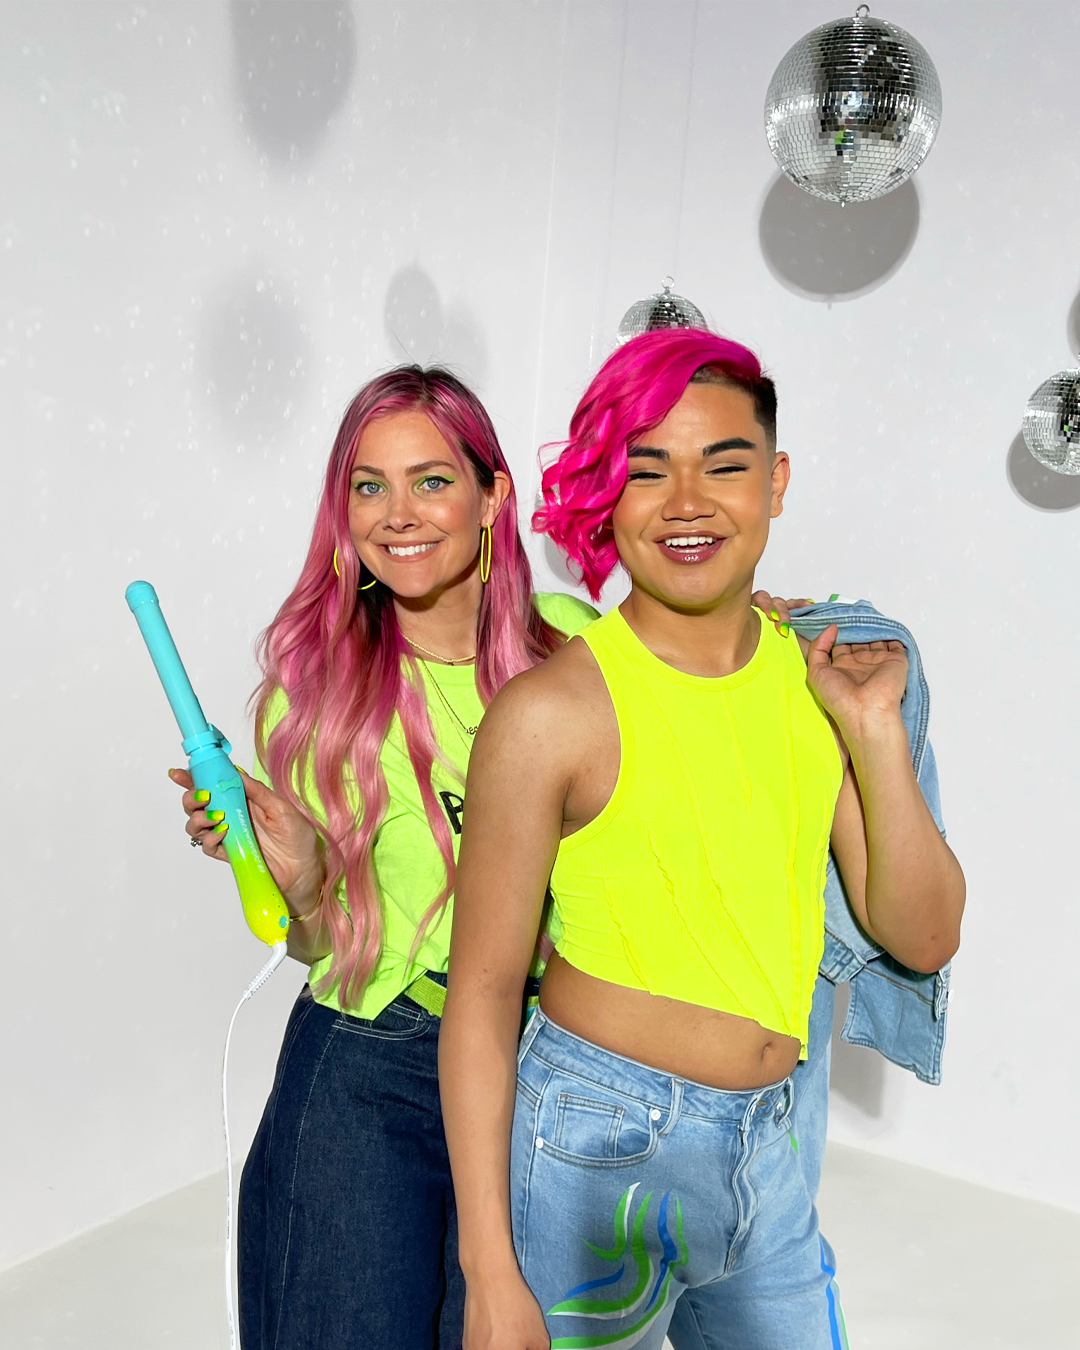 Image of Sarah Potempa and Model in the neon Akira collection  holding up neon B1 Beachwavers